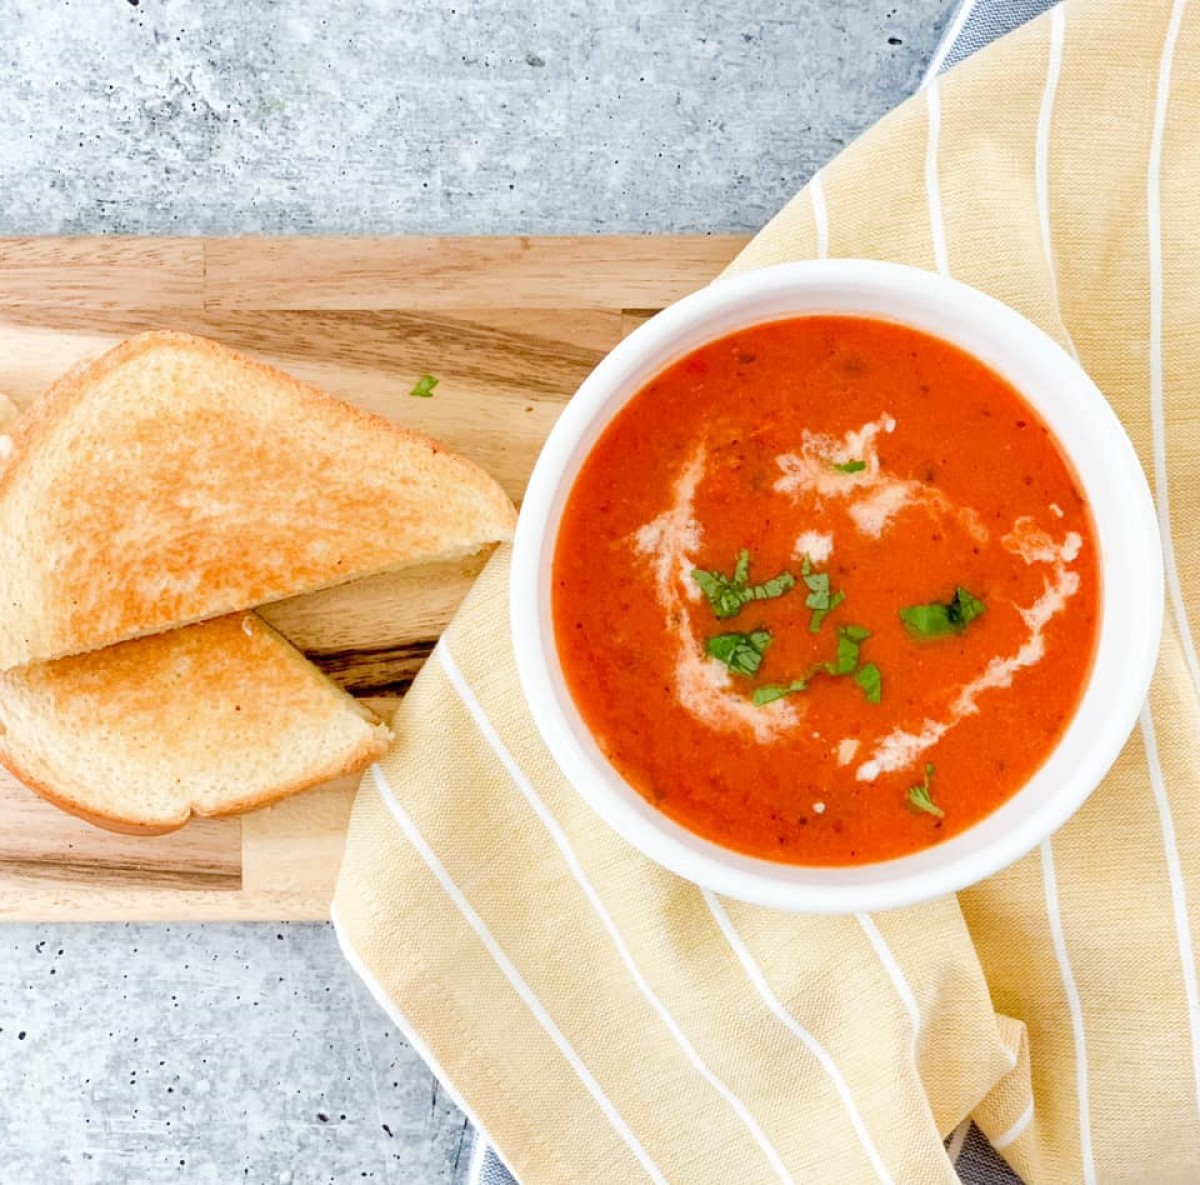 https://keepingonpoint.com/wp-content/uploads/2020/10/Instant-Pot-Fire-Roasted-Tomato-Soup-Weight-Watchers-Recipes-WW-Recipes-Healthy-Recipes-1.jpg